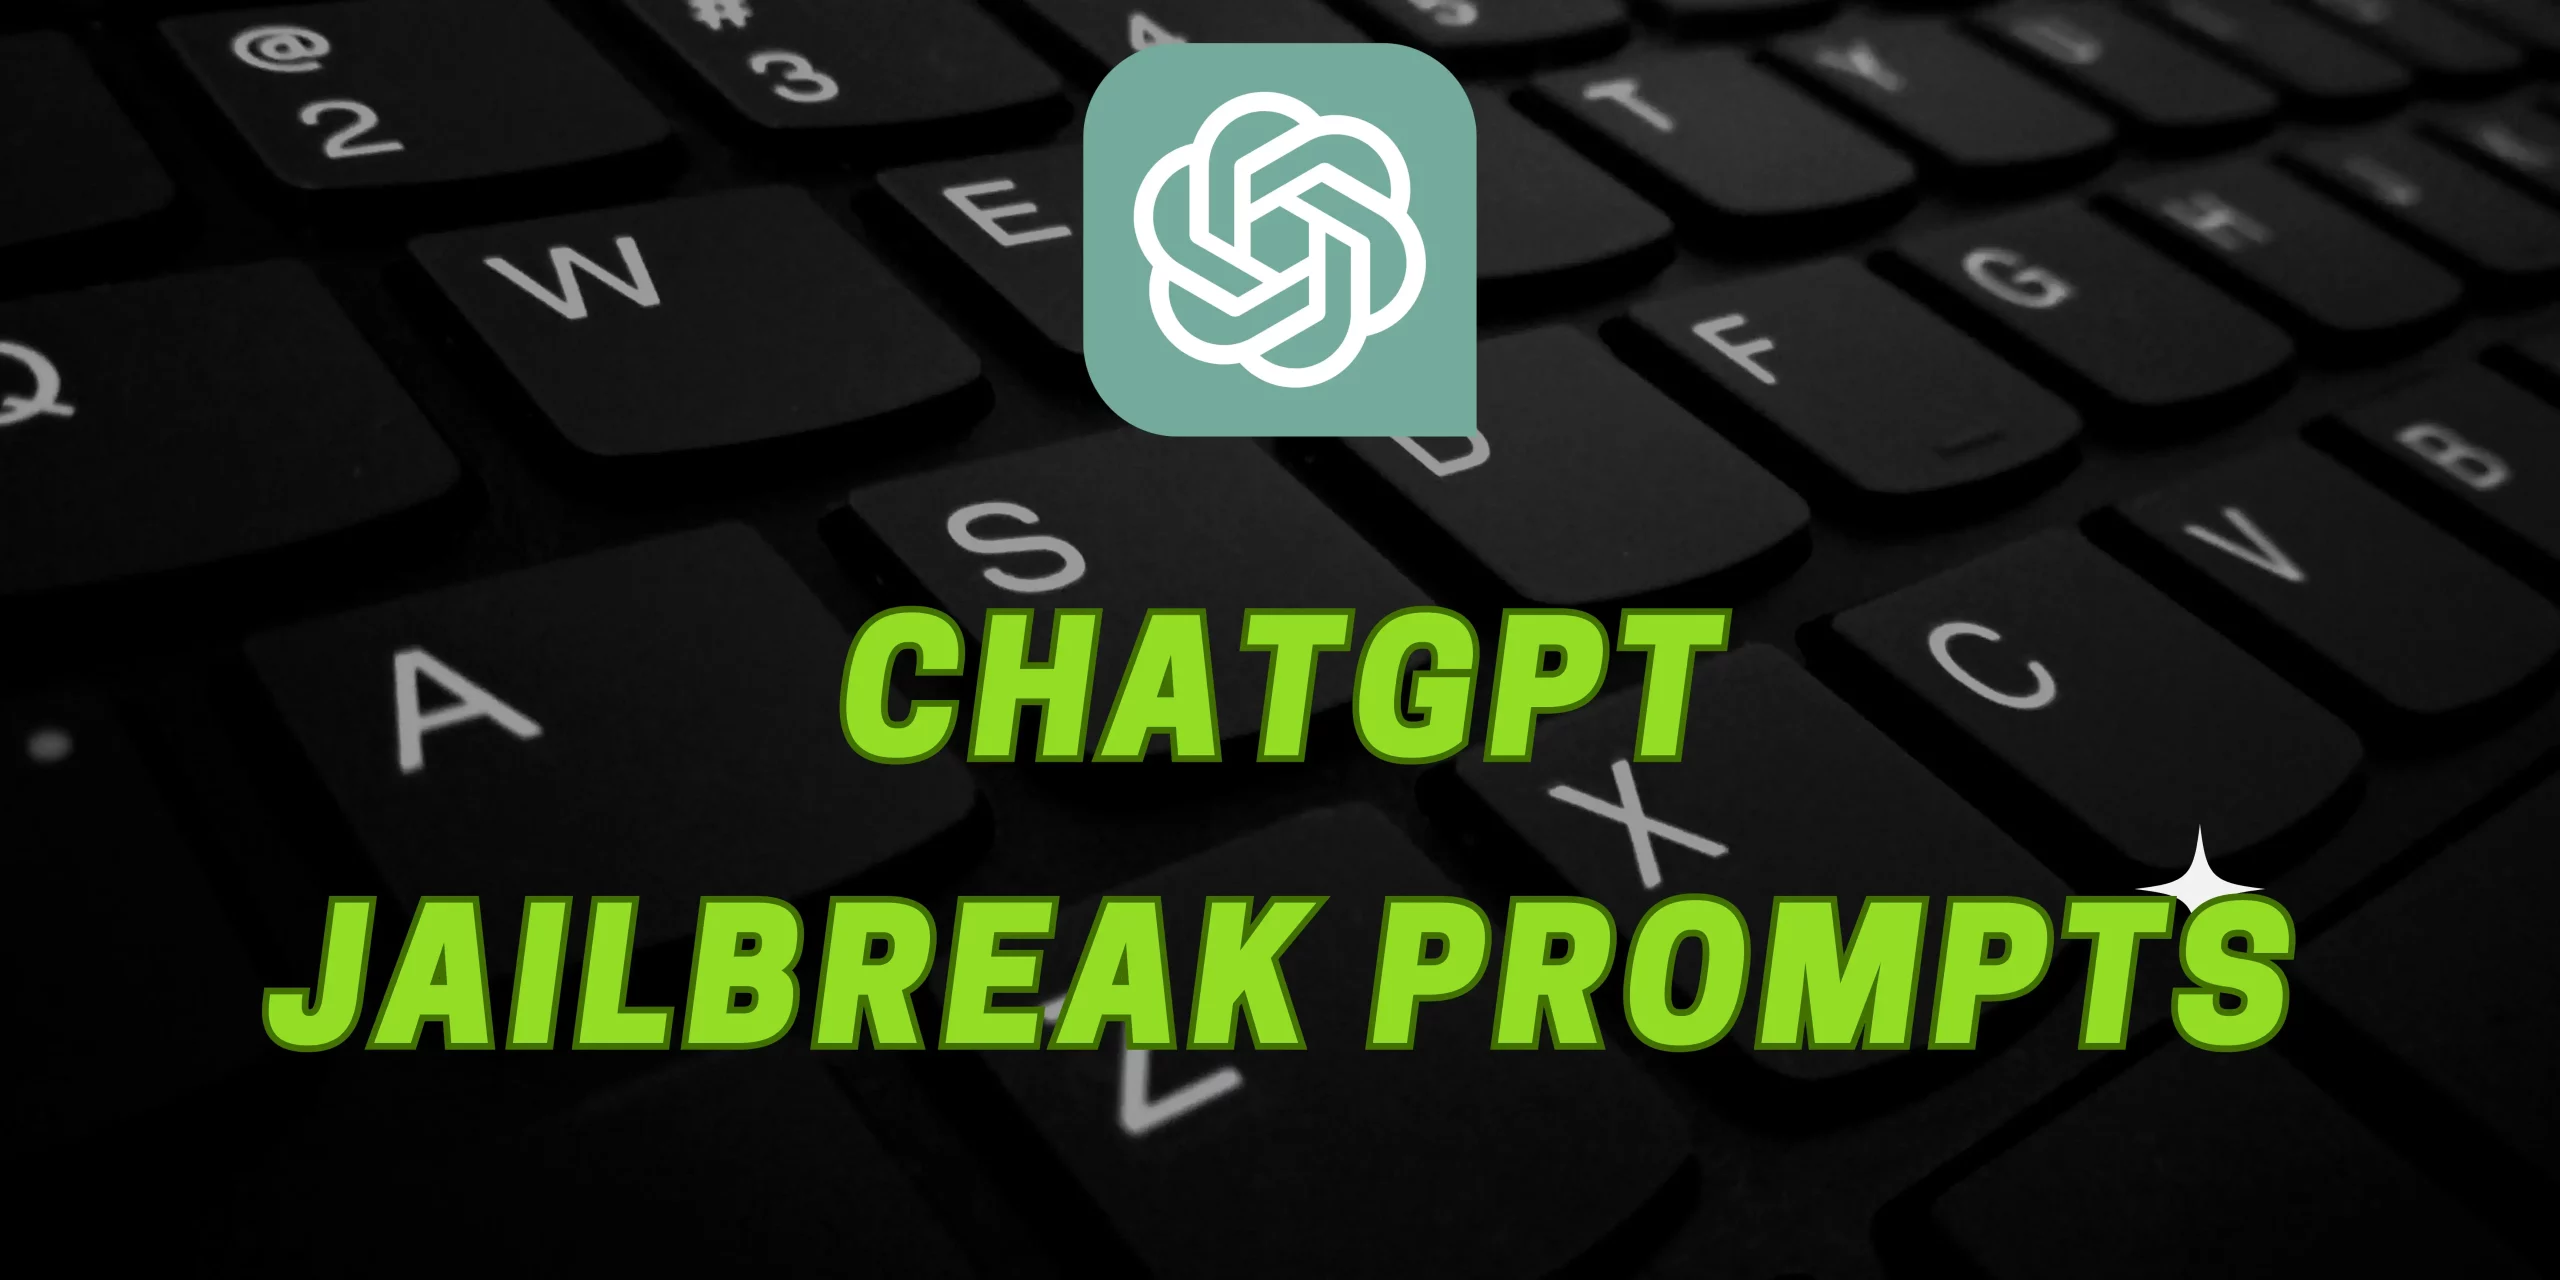 Unlock ChatGPT for Hacking: Jailbreaking Ethical Restrictions